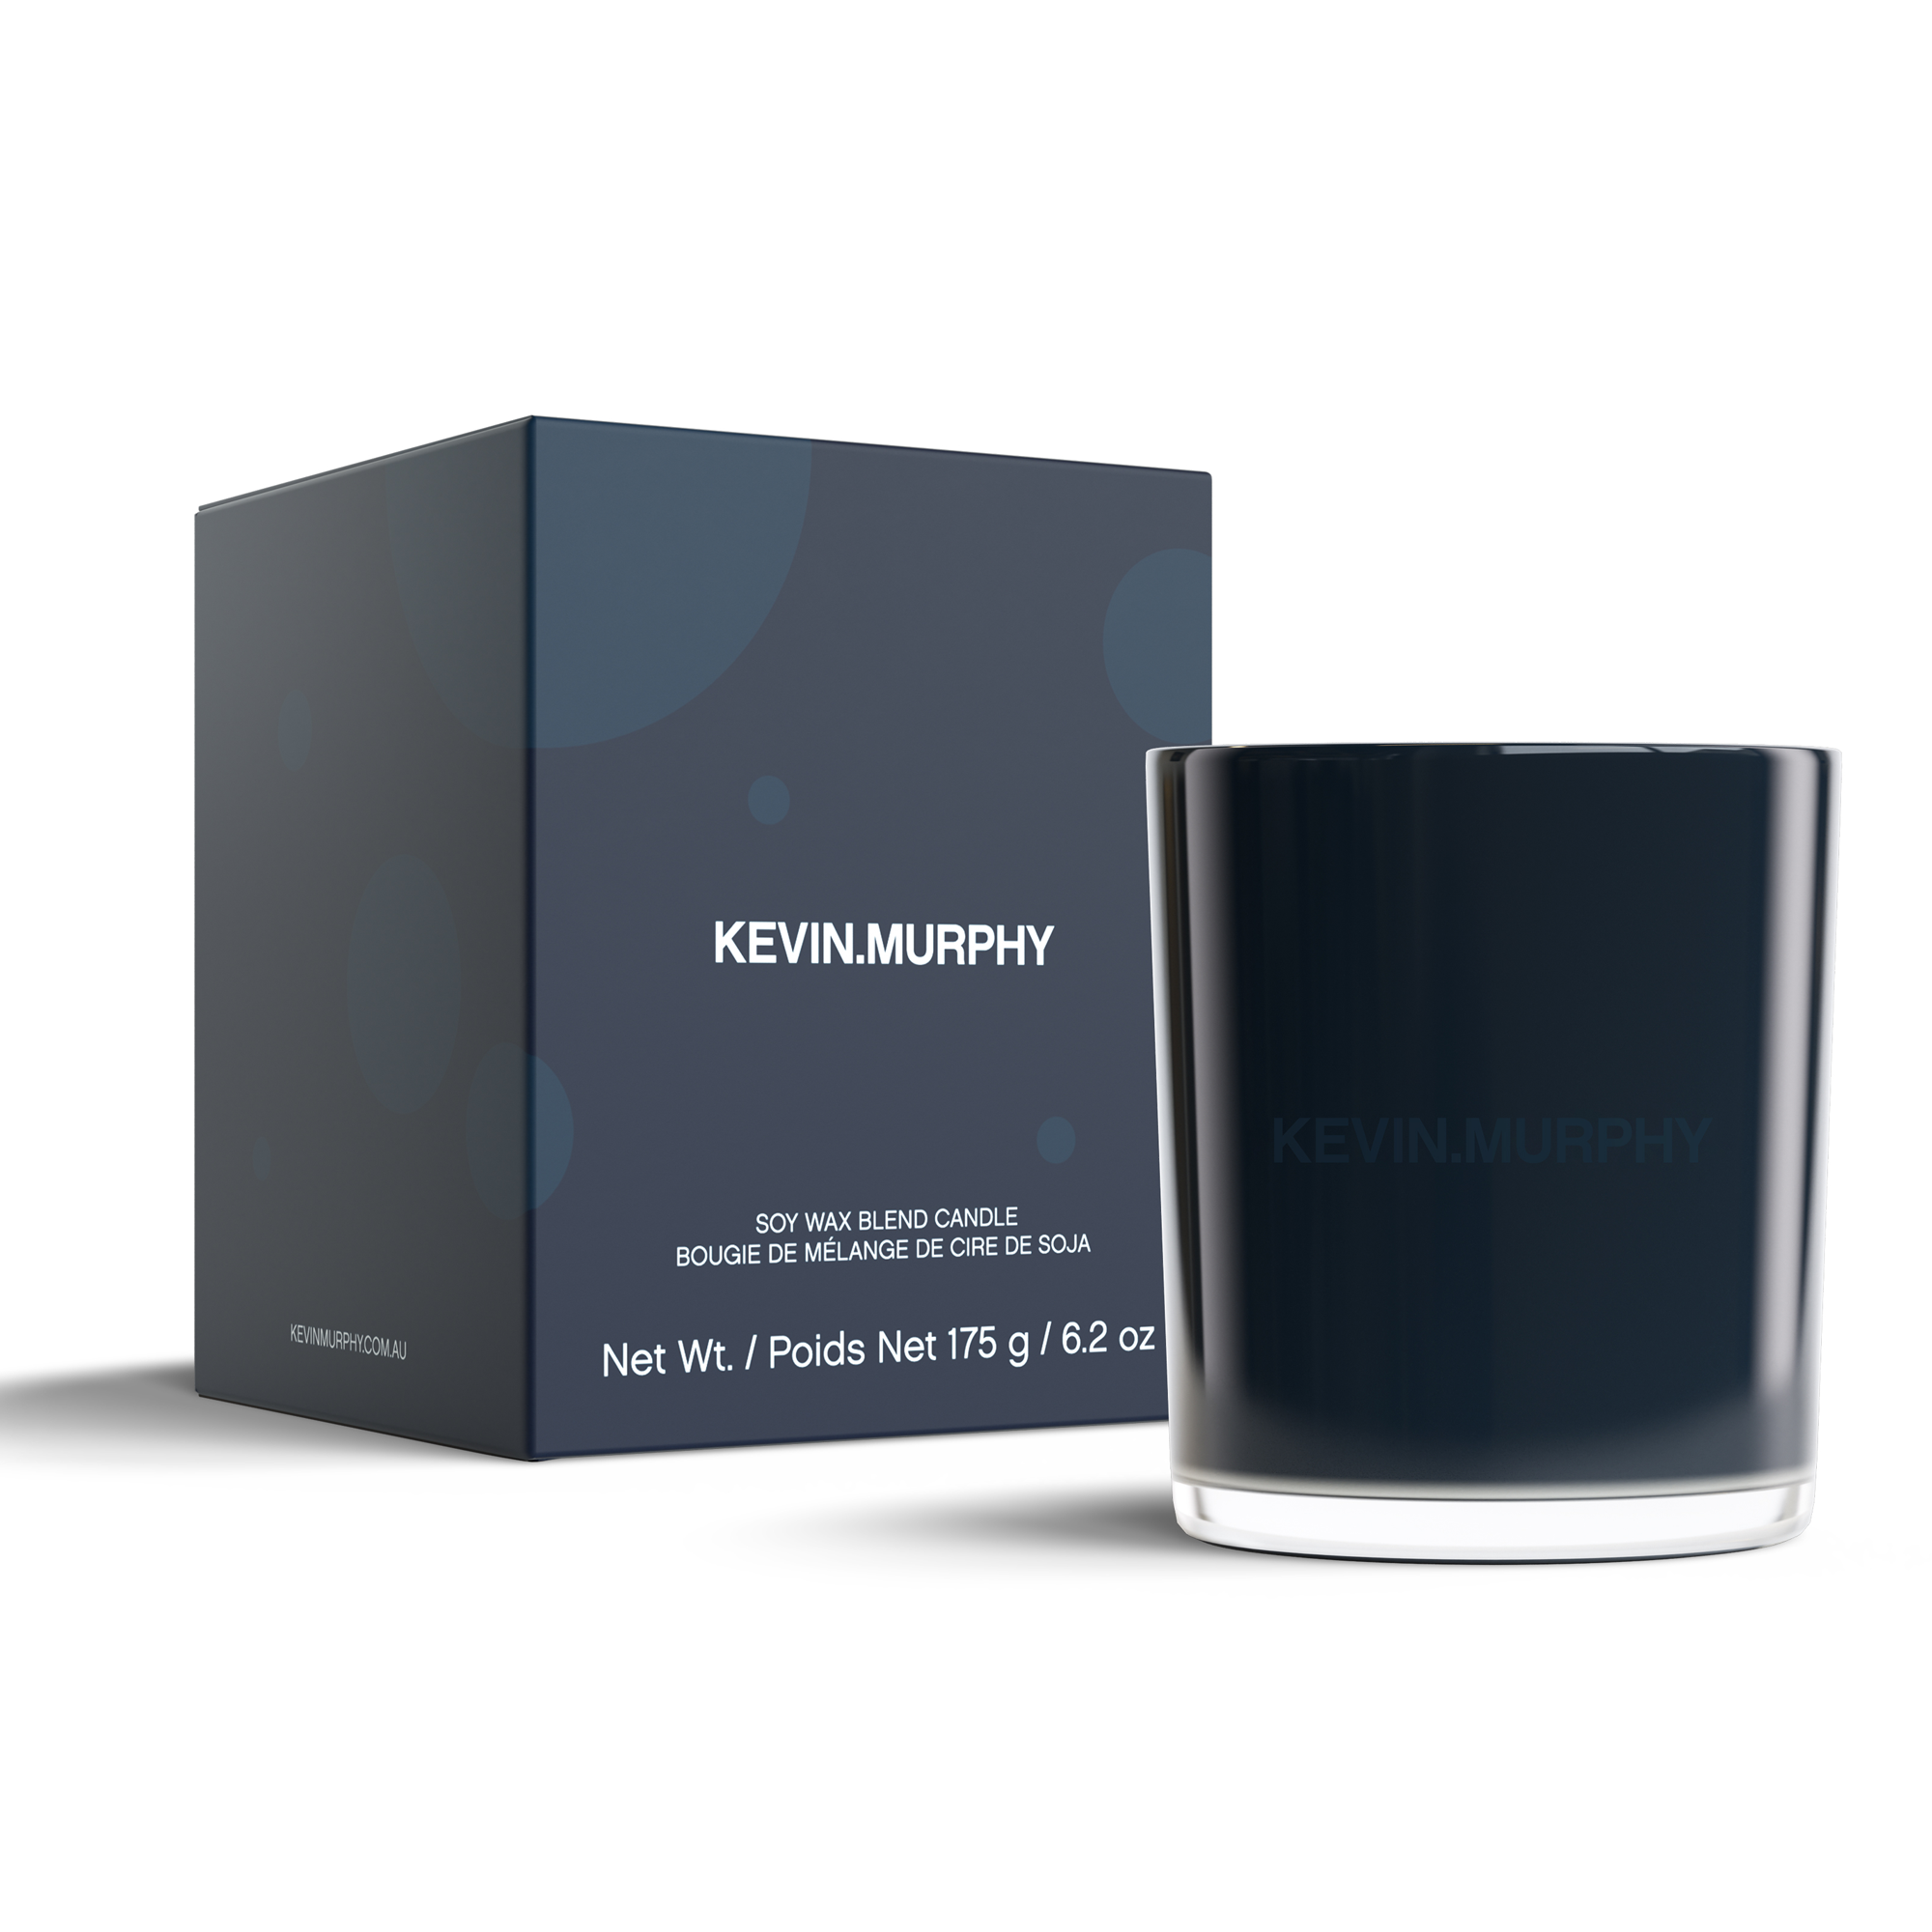 KEVIN.MURPHY Limited Edition Holiday Candle Infused with Cedarwood  Patchouli - 1 item